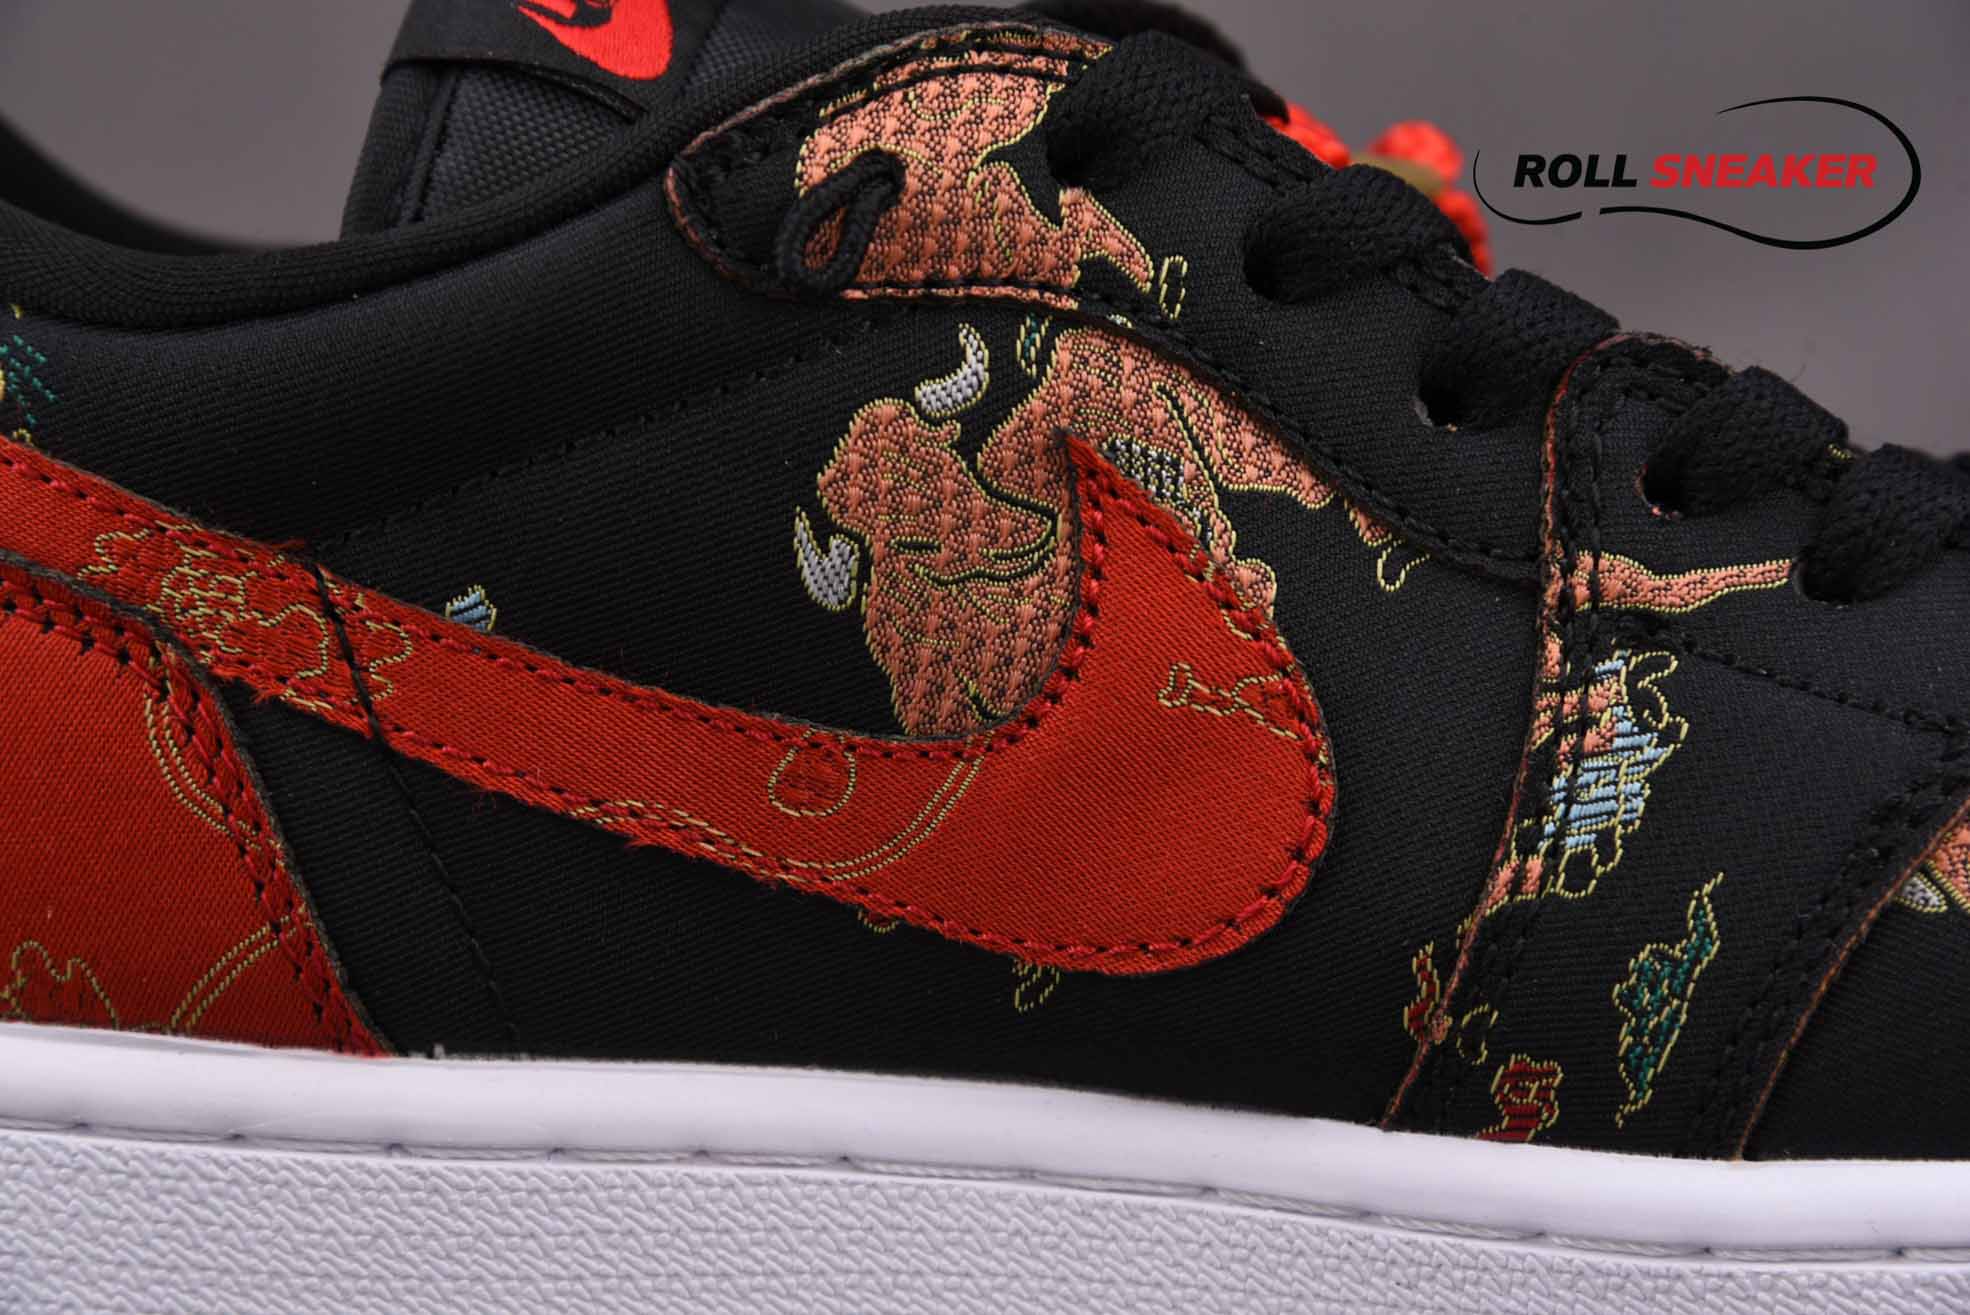 Nike Air Jordan 1 Low OG “Chinese New Year” Limited